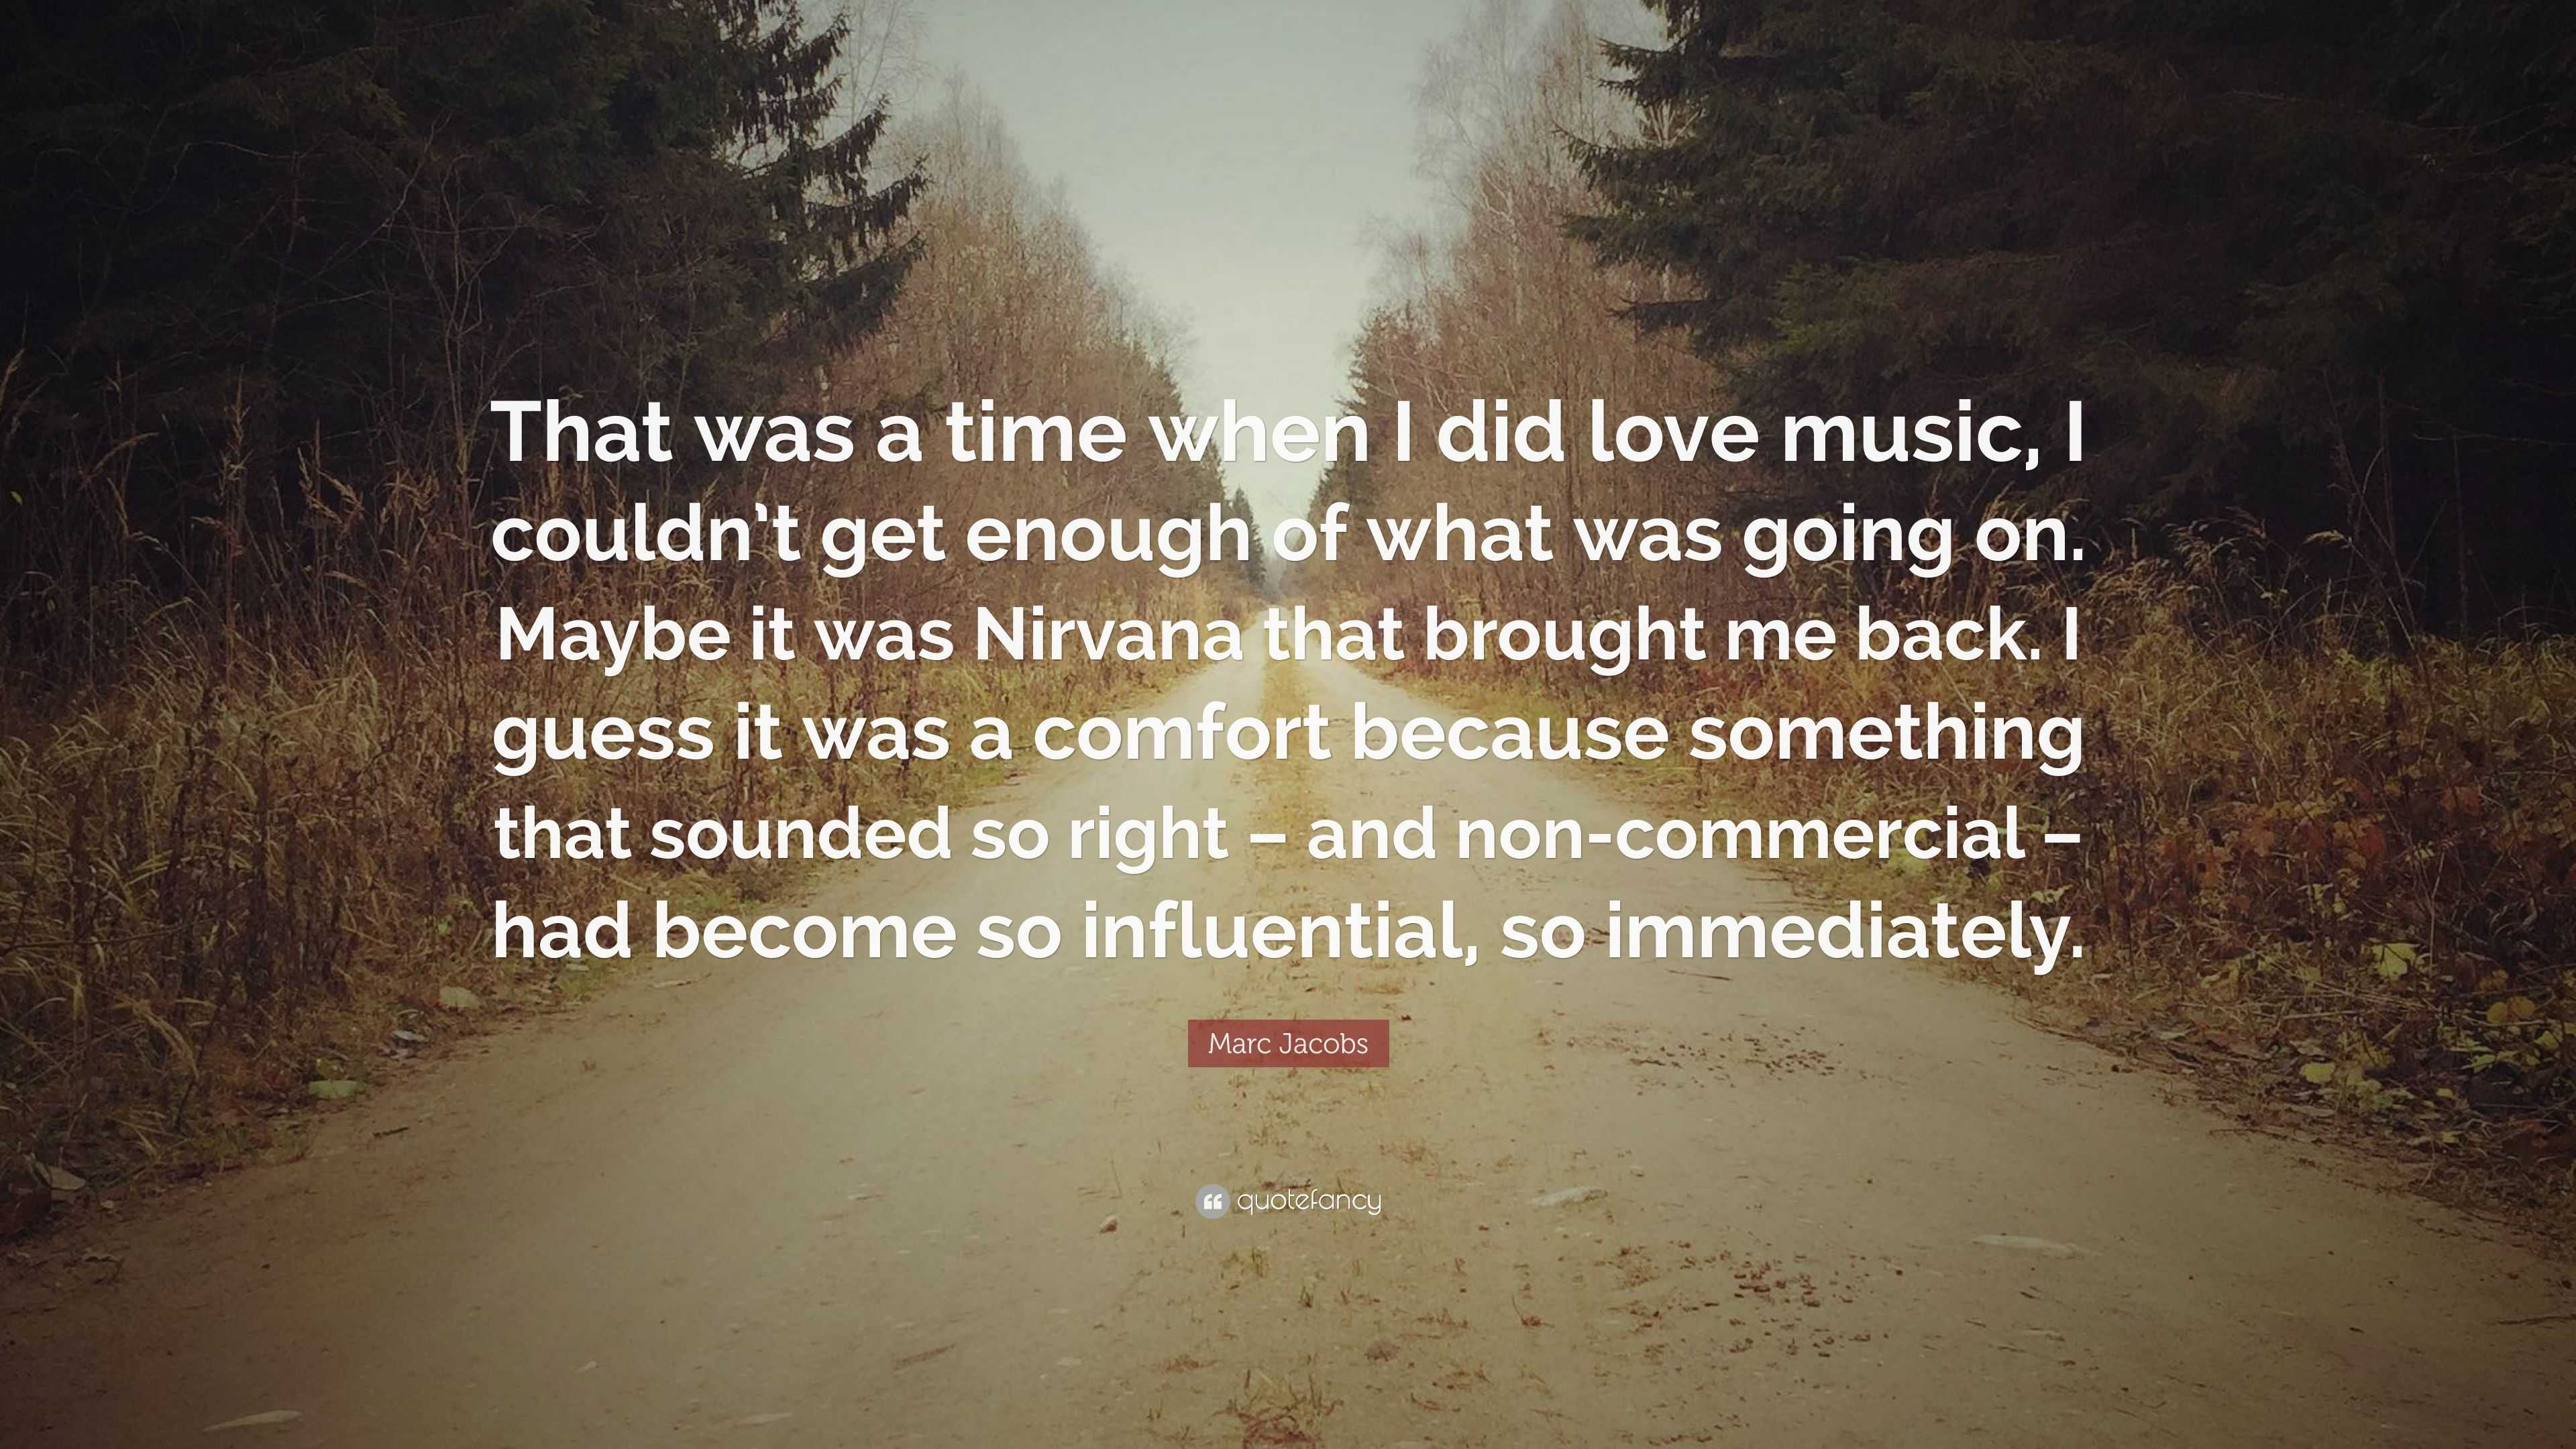 Marc Jacobs Quote: “That was a time when I did love music, I couldn’t